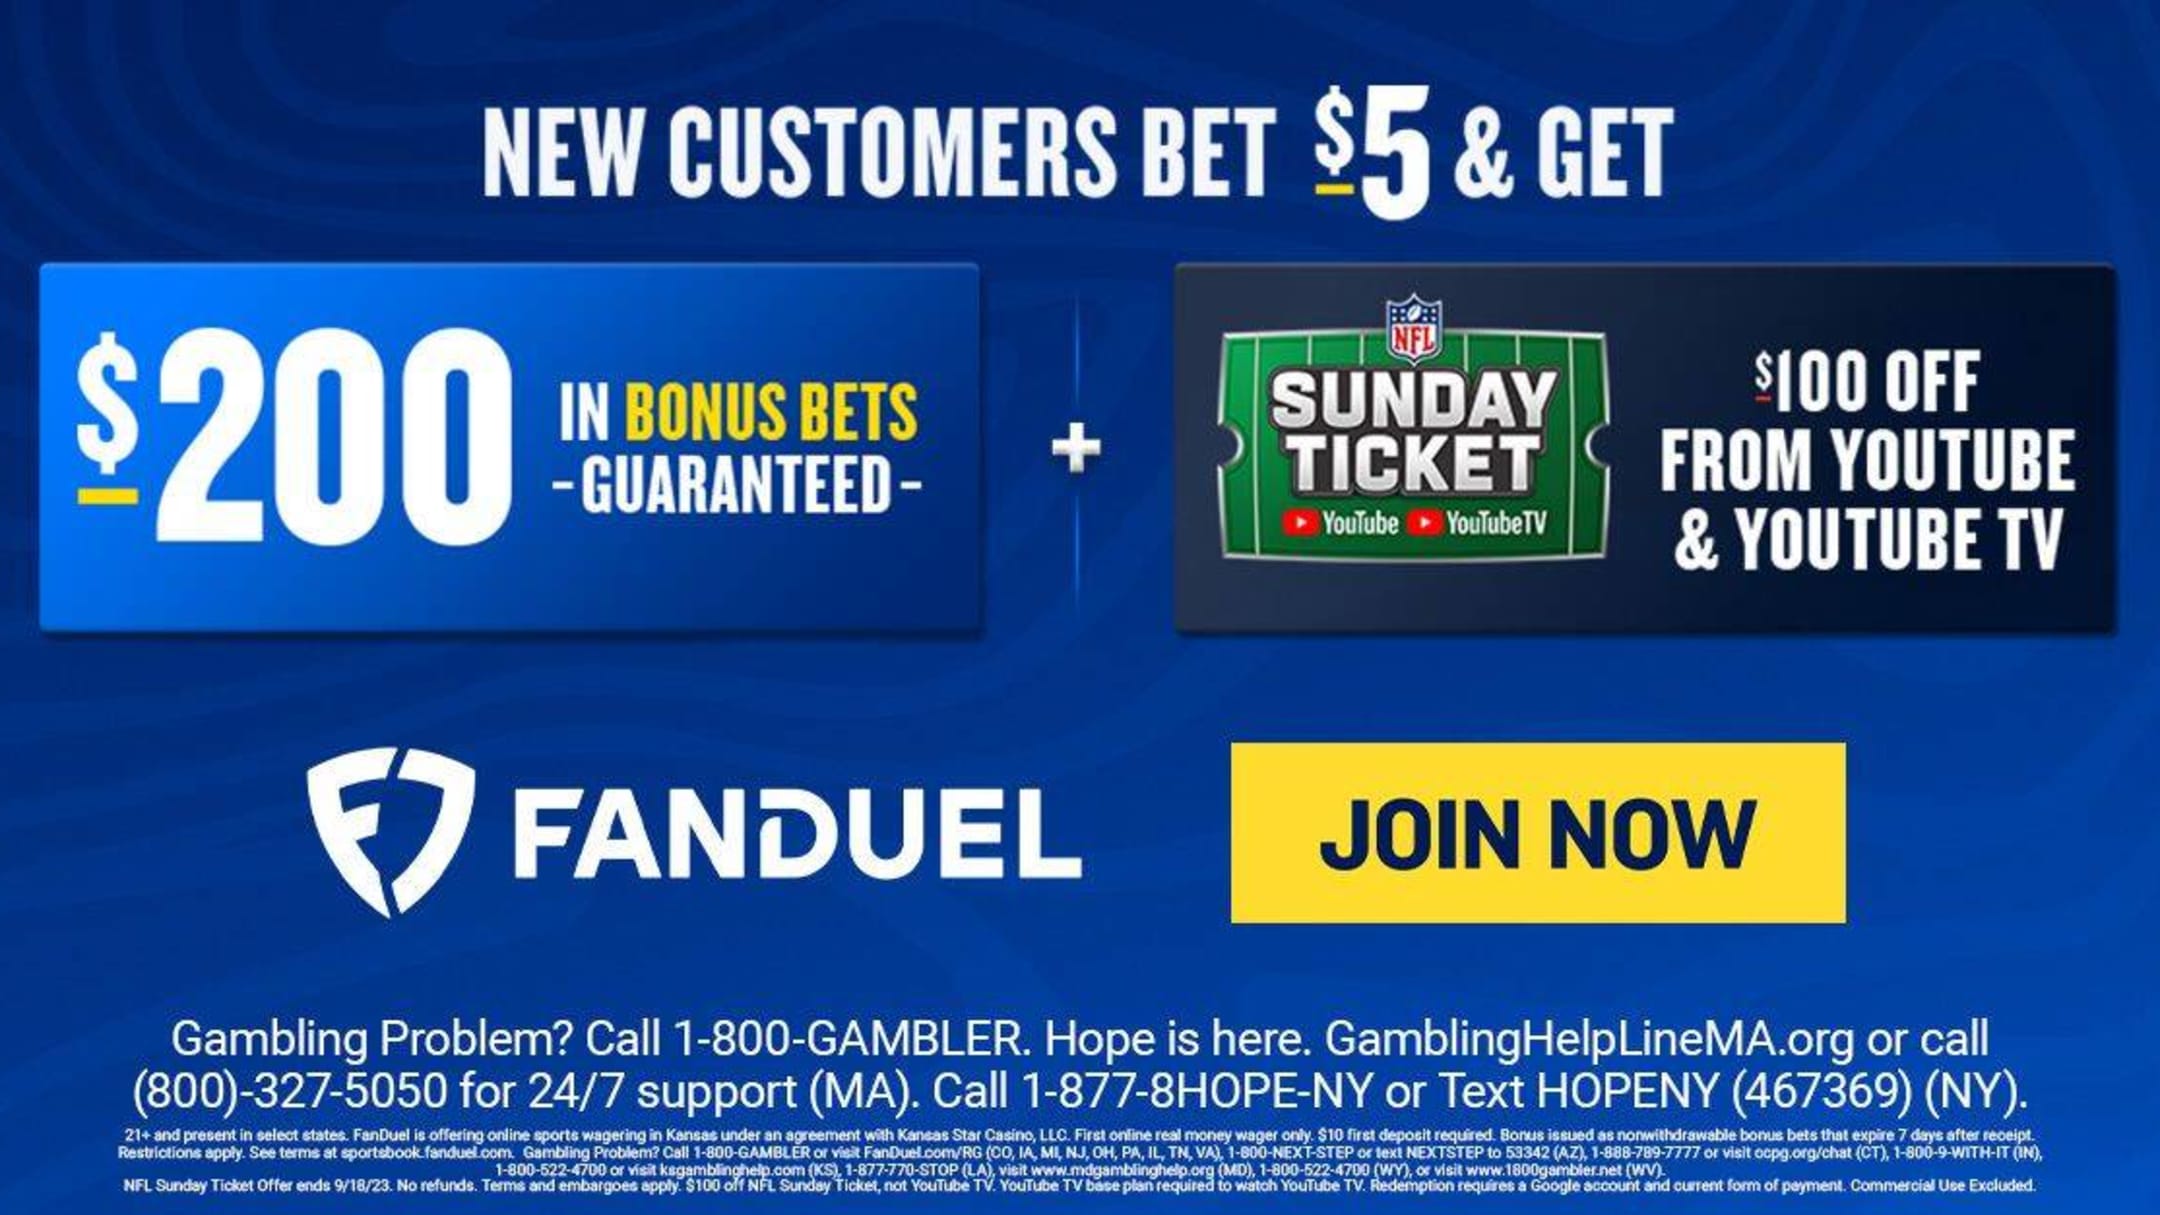 NFL Sunday Ticket: Get $100 OFF Sunday Ticket With This   TV